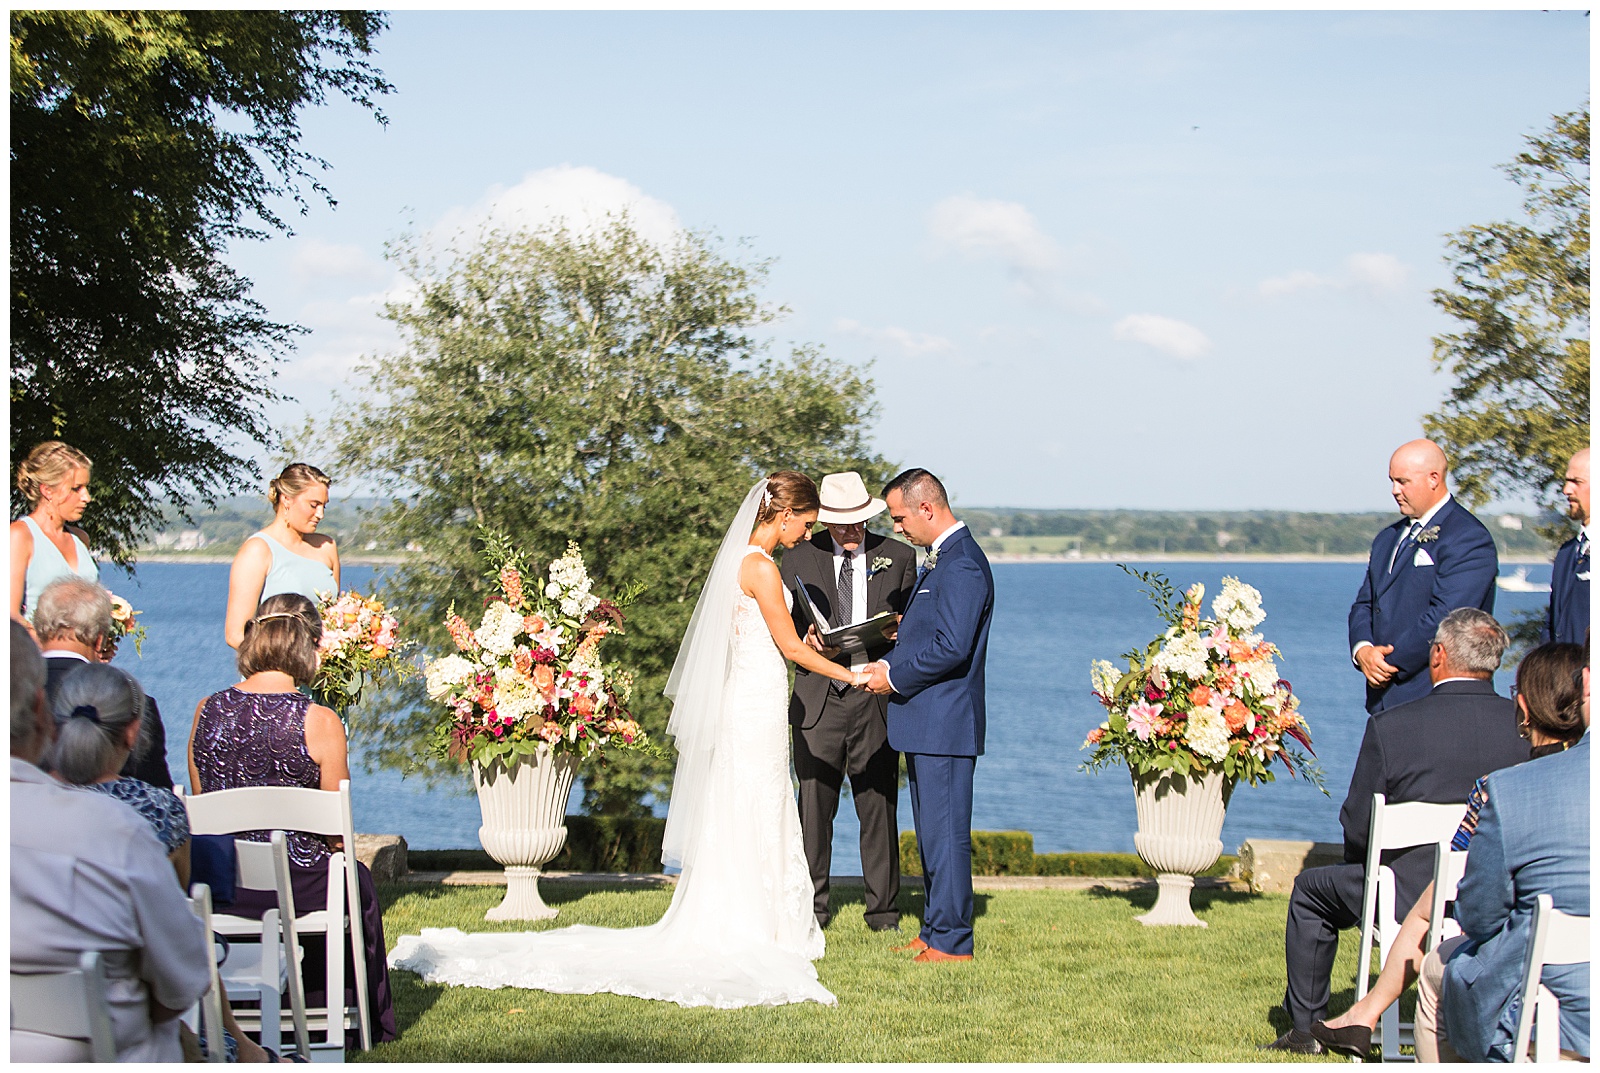 Wedding on the lawn overlooking the Sakonnet River at Glen Manor House